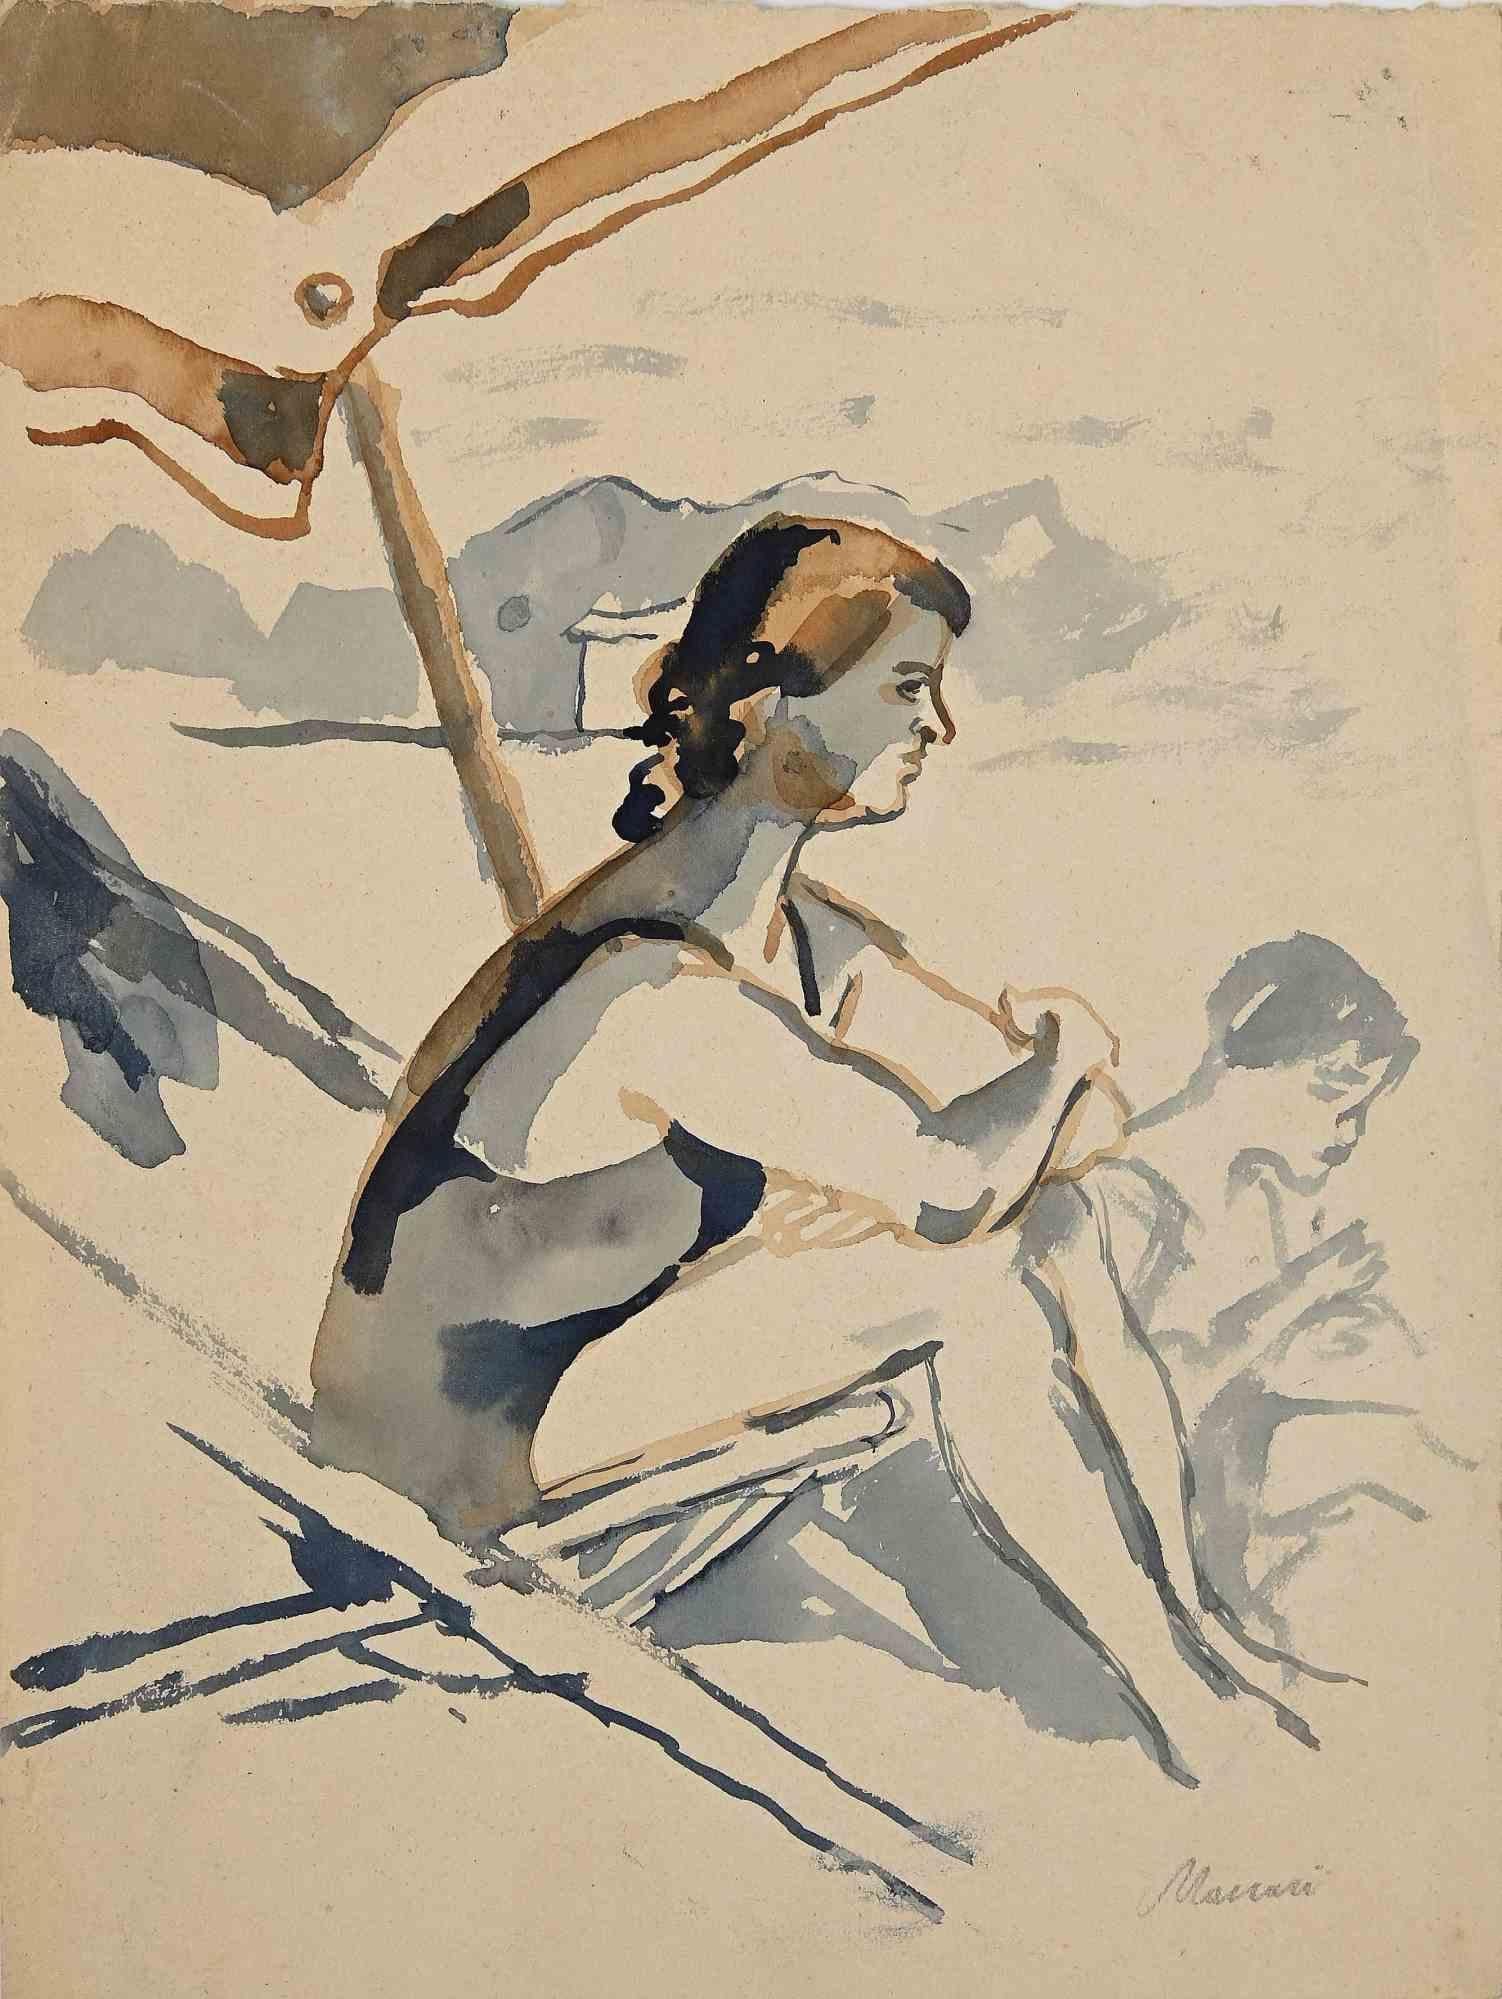 At the Beach is an original Watercolour realized by Mino Maccari in mid-20th Century.

Good condition on a yellowed paper.

Hand-signed by the artist with pencil.

Mino Maccari (1898-1989) was an Italian writer, painter, engraver and journalist,